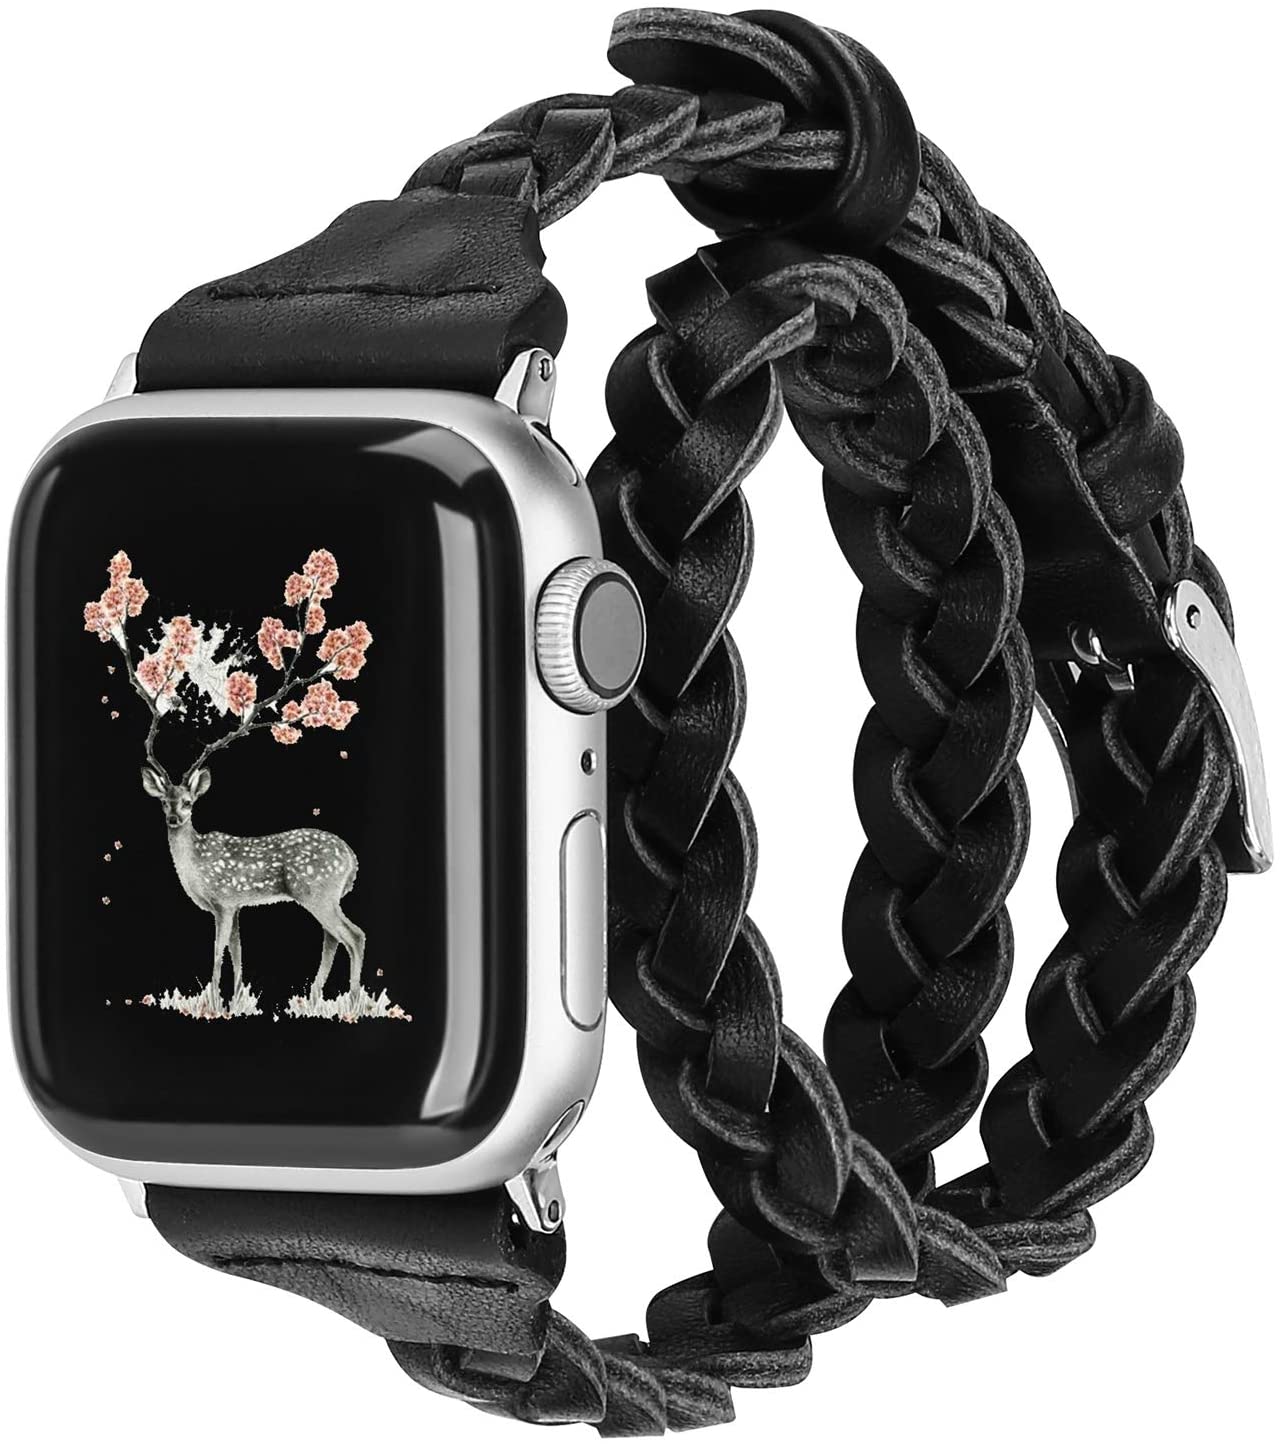 Wearlizer Double Wrap Gift Band Compatible with Apple Watch Bands 38mm 40mm Women - BLACK - e4cents